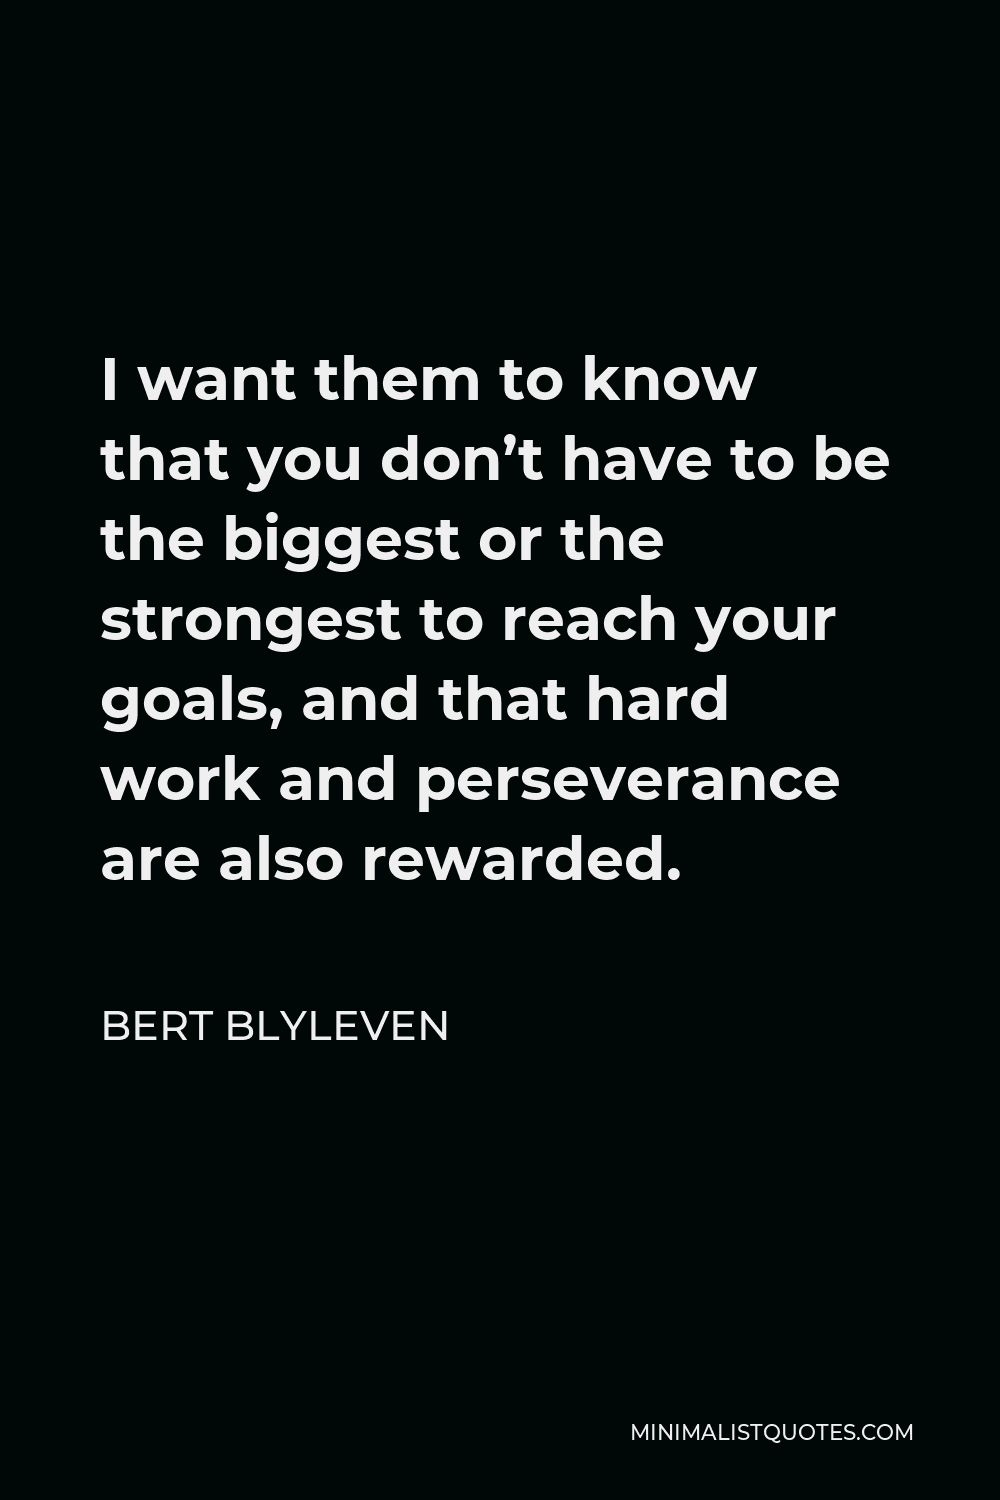 Bert Blyleven Quote - I want them to know that you don’t have to be the biggest or the strongest to reach your goals, and that hard work and perseverance are also rewarded.